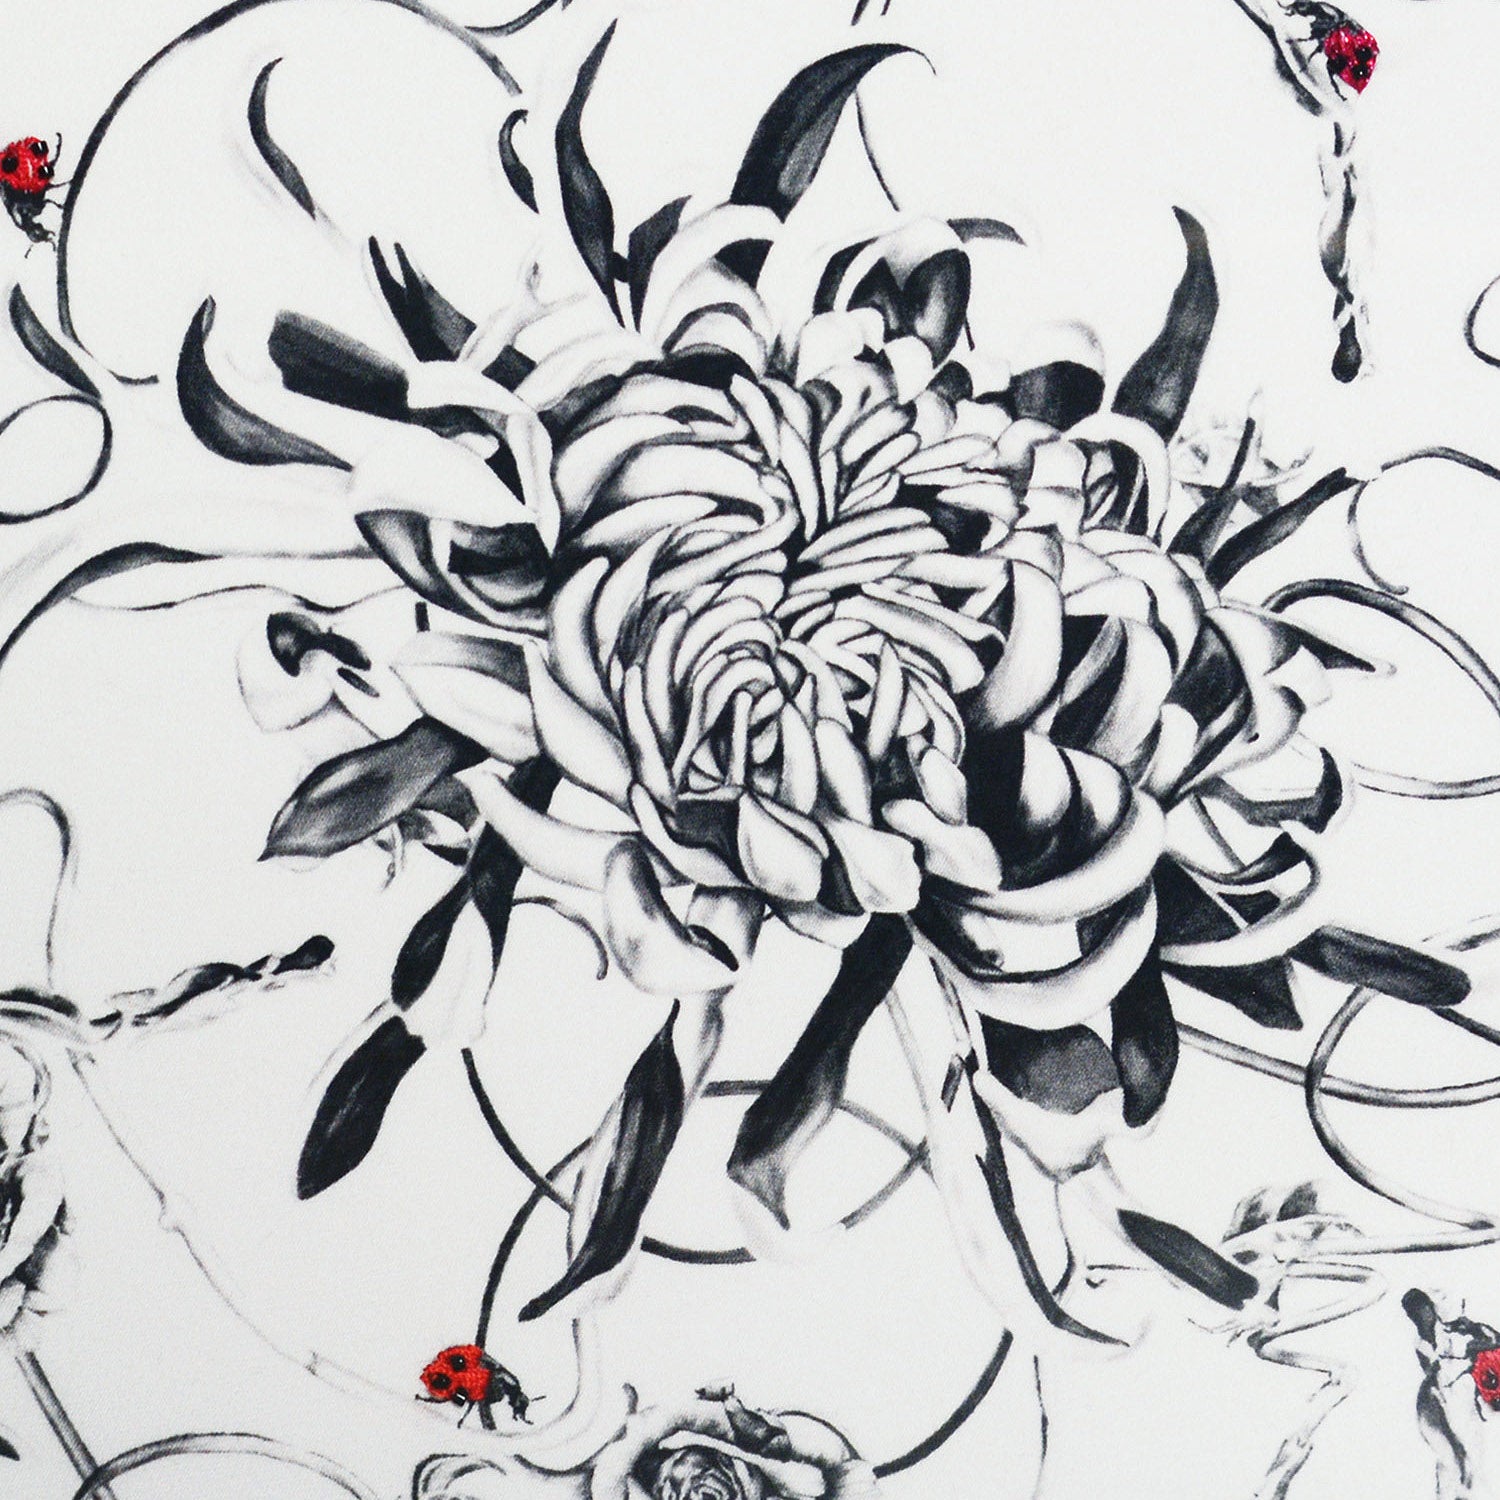 Artwork with monochrome floral design and hand embroidered ladybirds close up